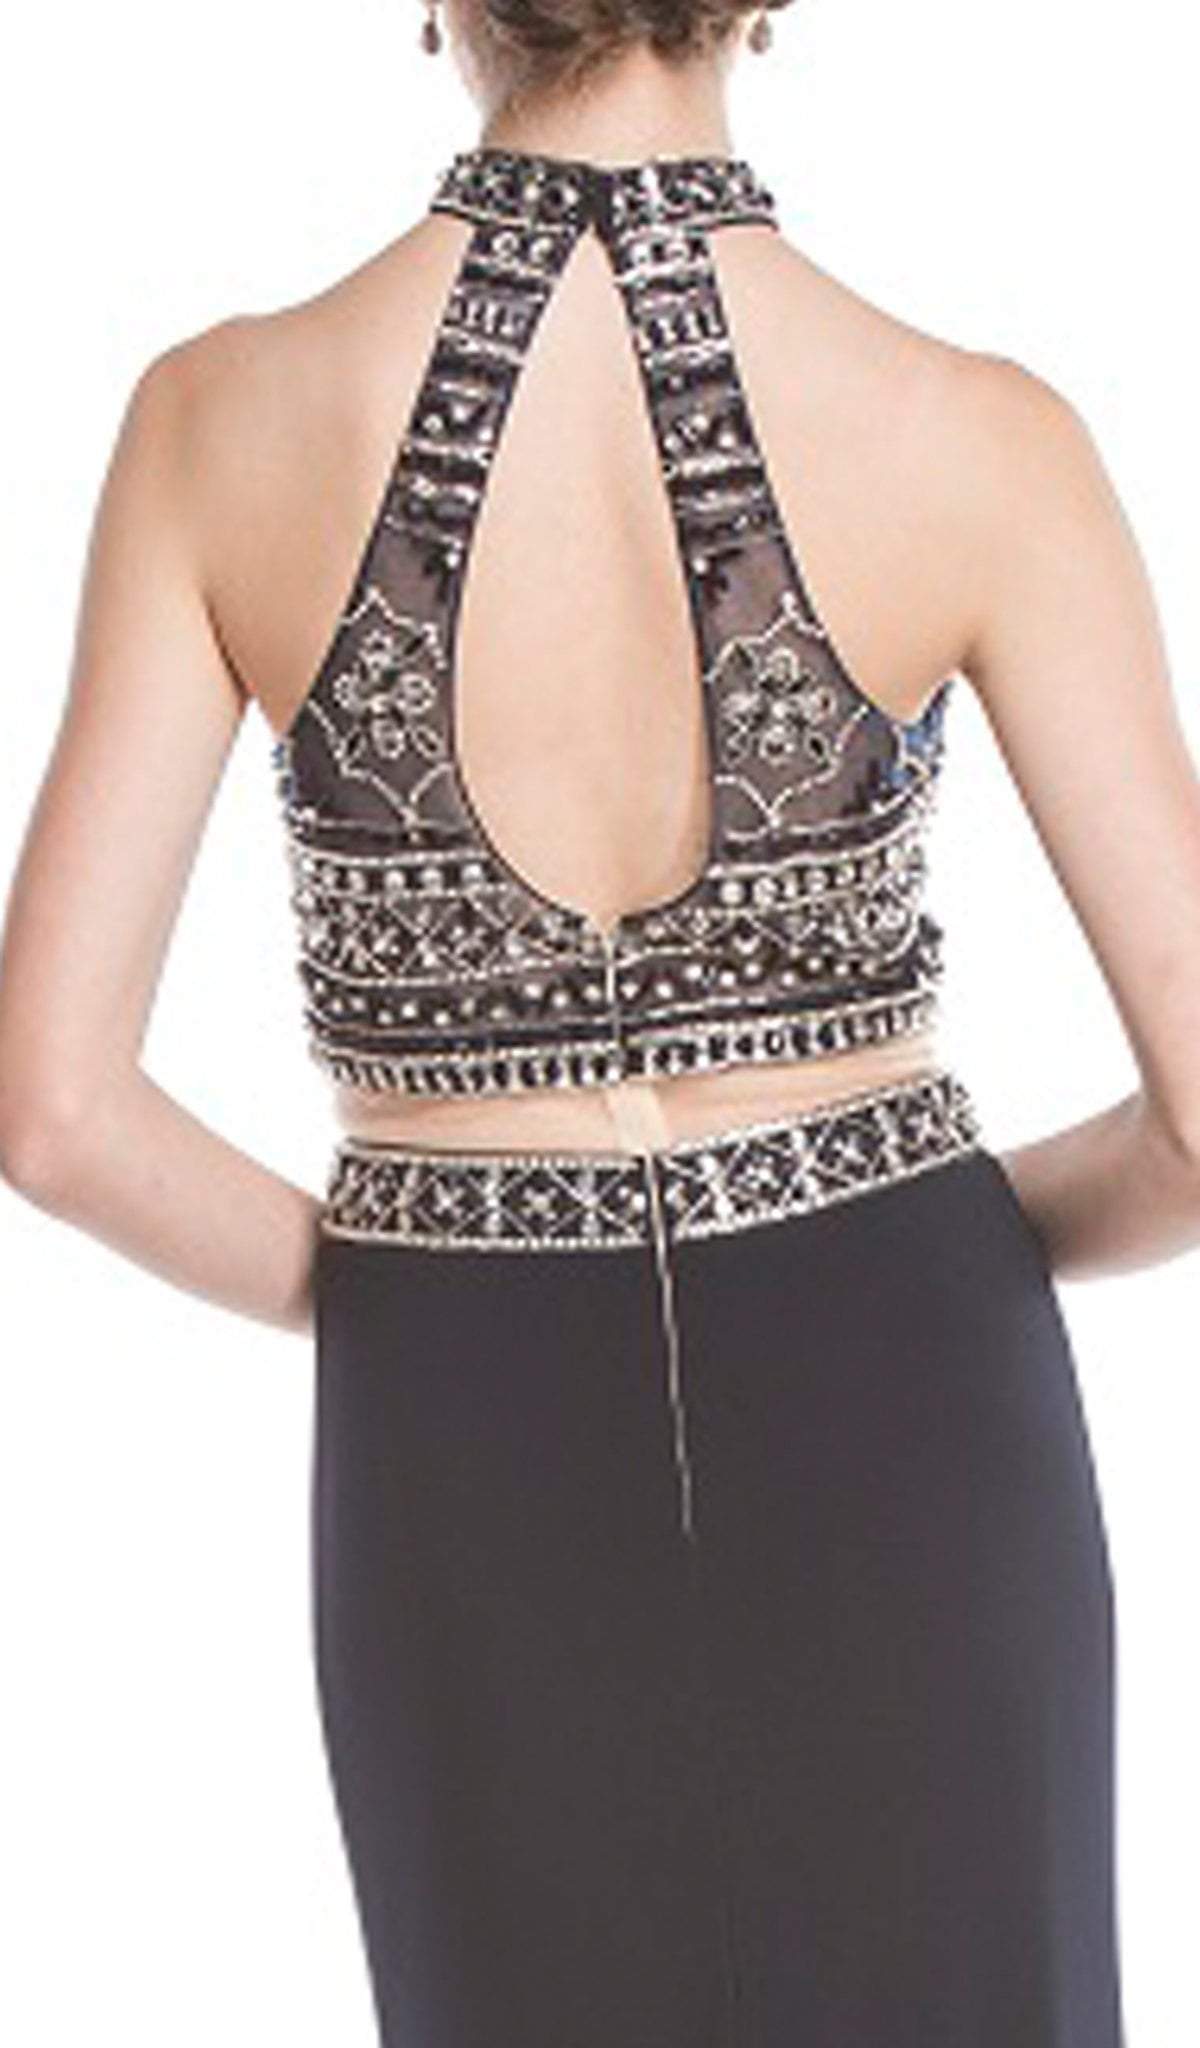 Two Piece Beaded High Halter Evening Gown Dress